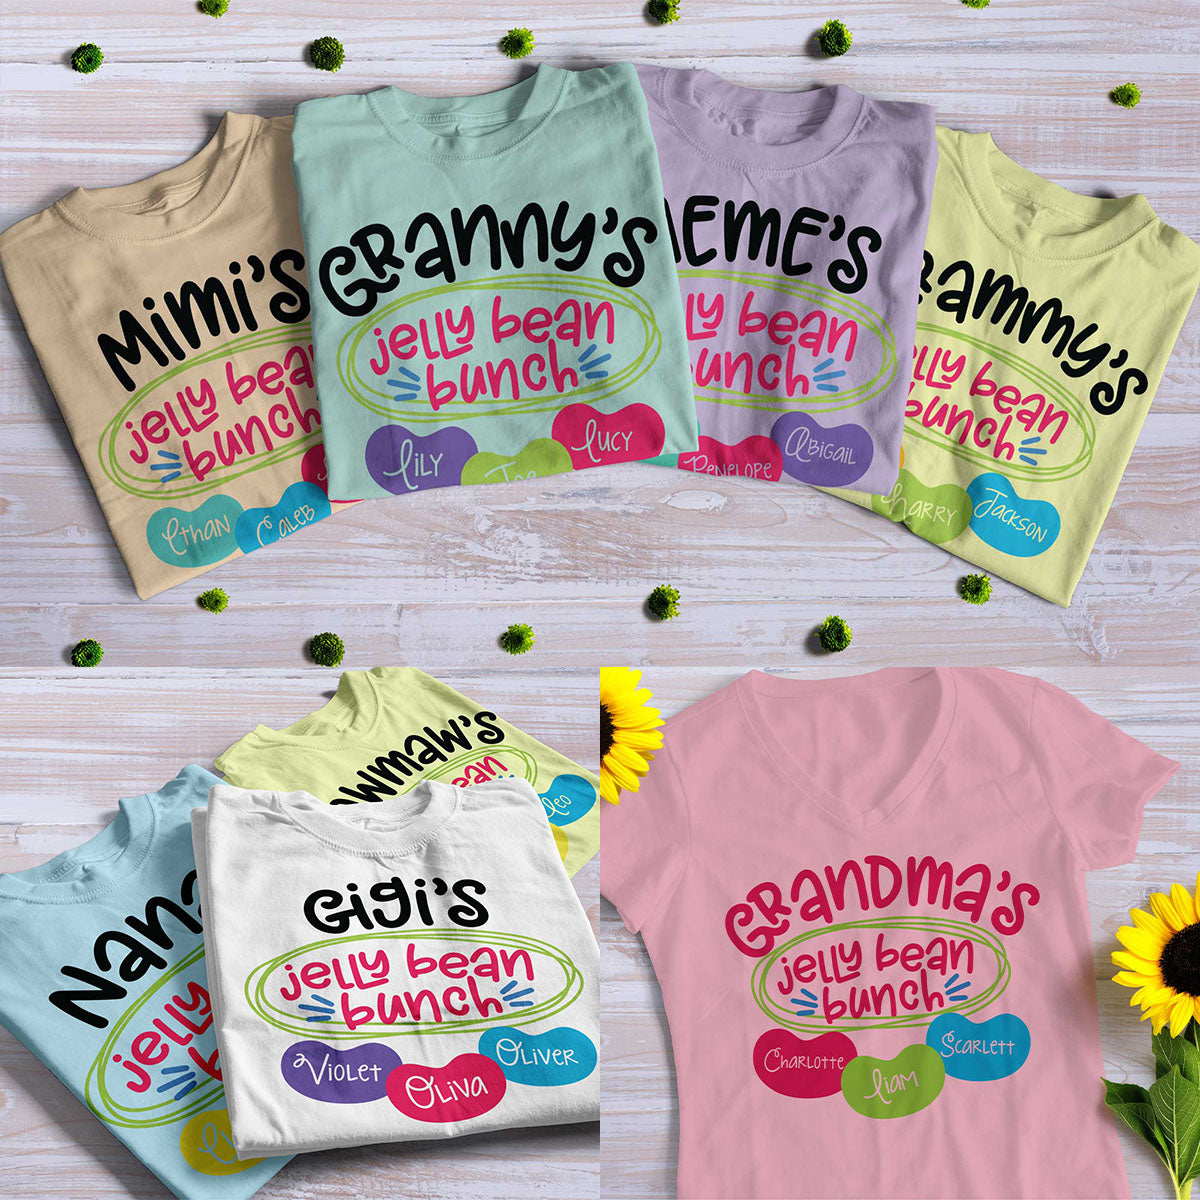 Grandma Jelly Bean Bunch Pack | SVG DXF EPS PNG Cut Files